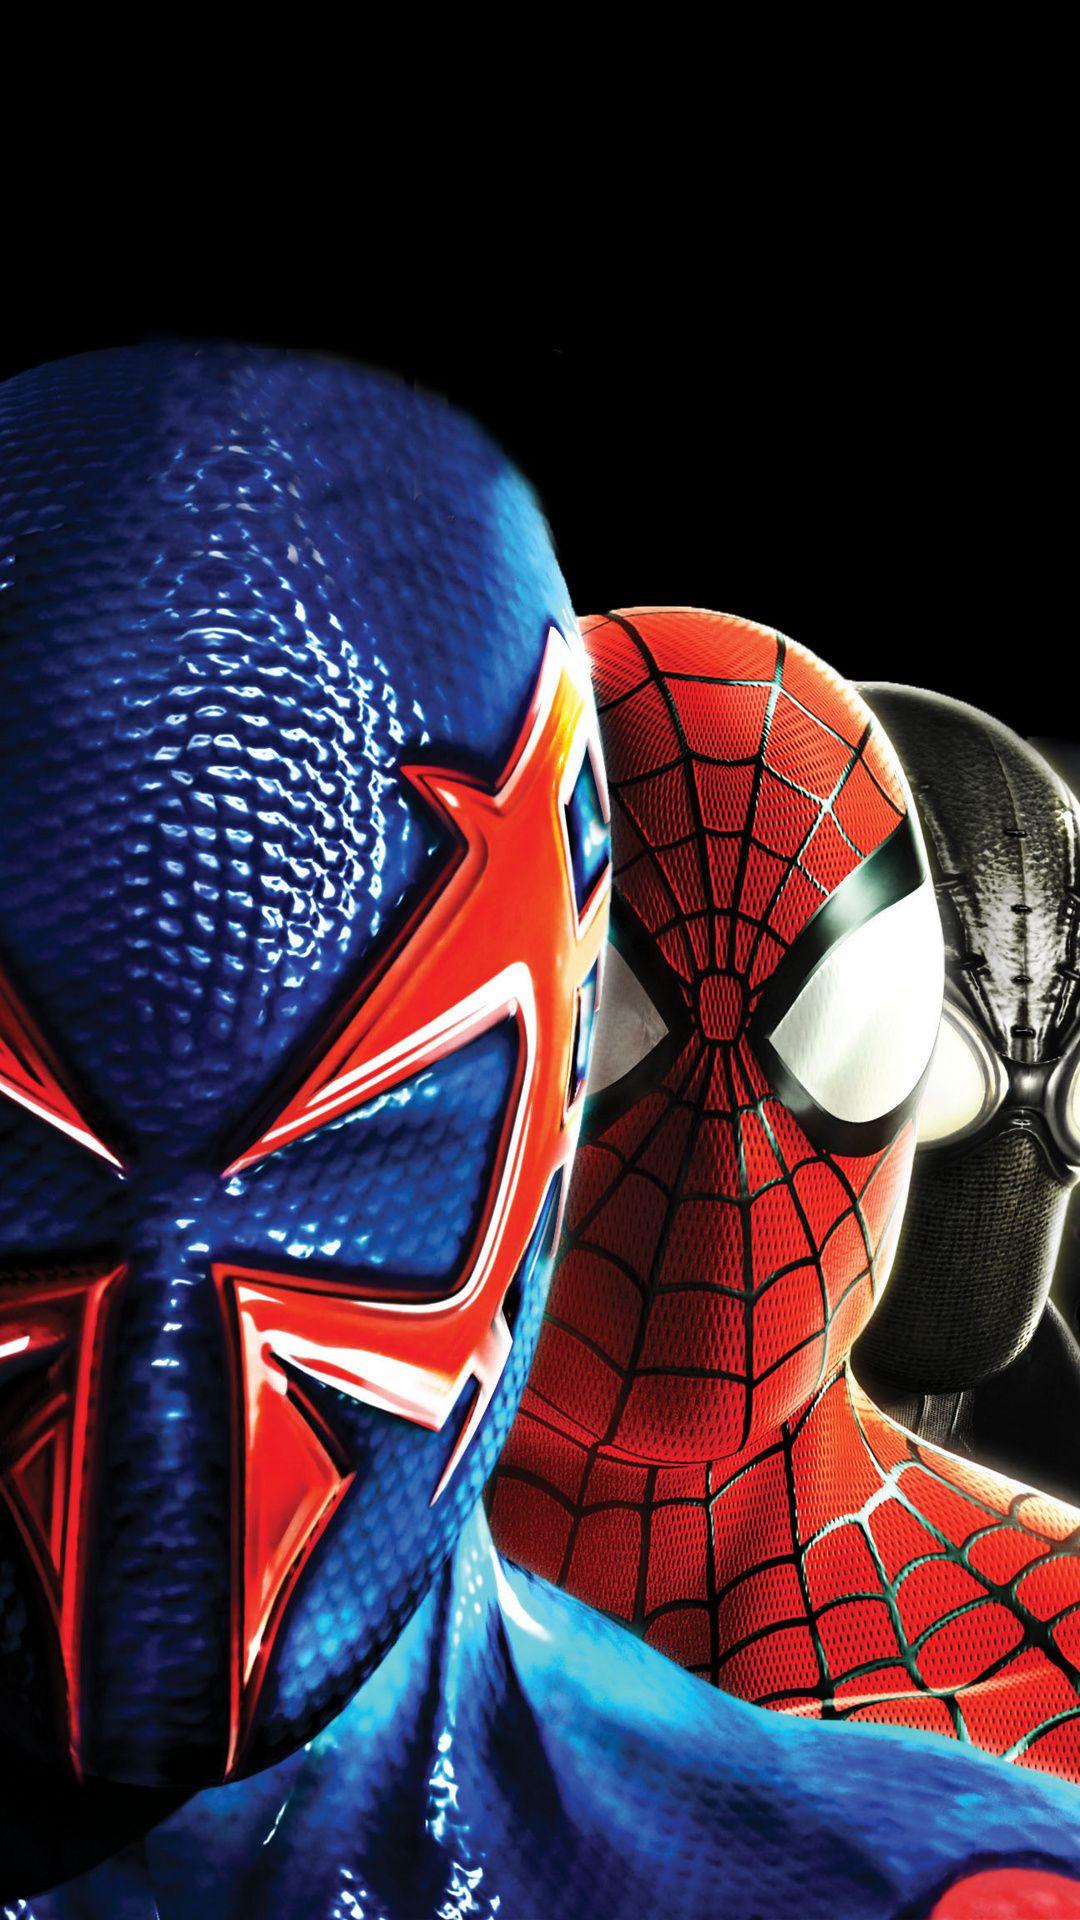 Spider-Man Cell Phone Wallpapers - Top Free Spider-Man ...